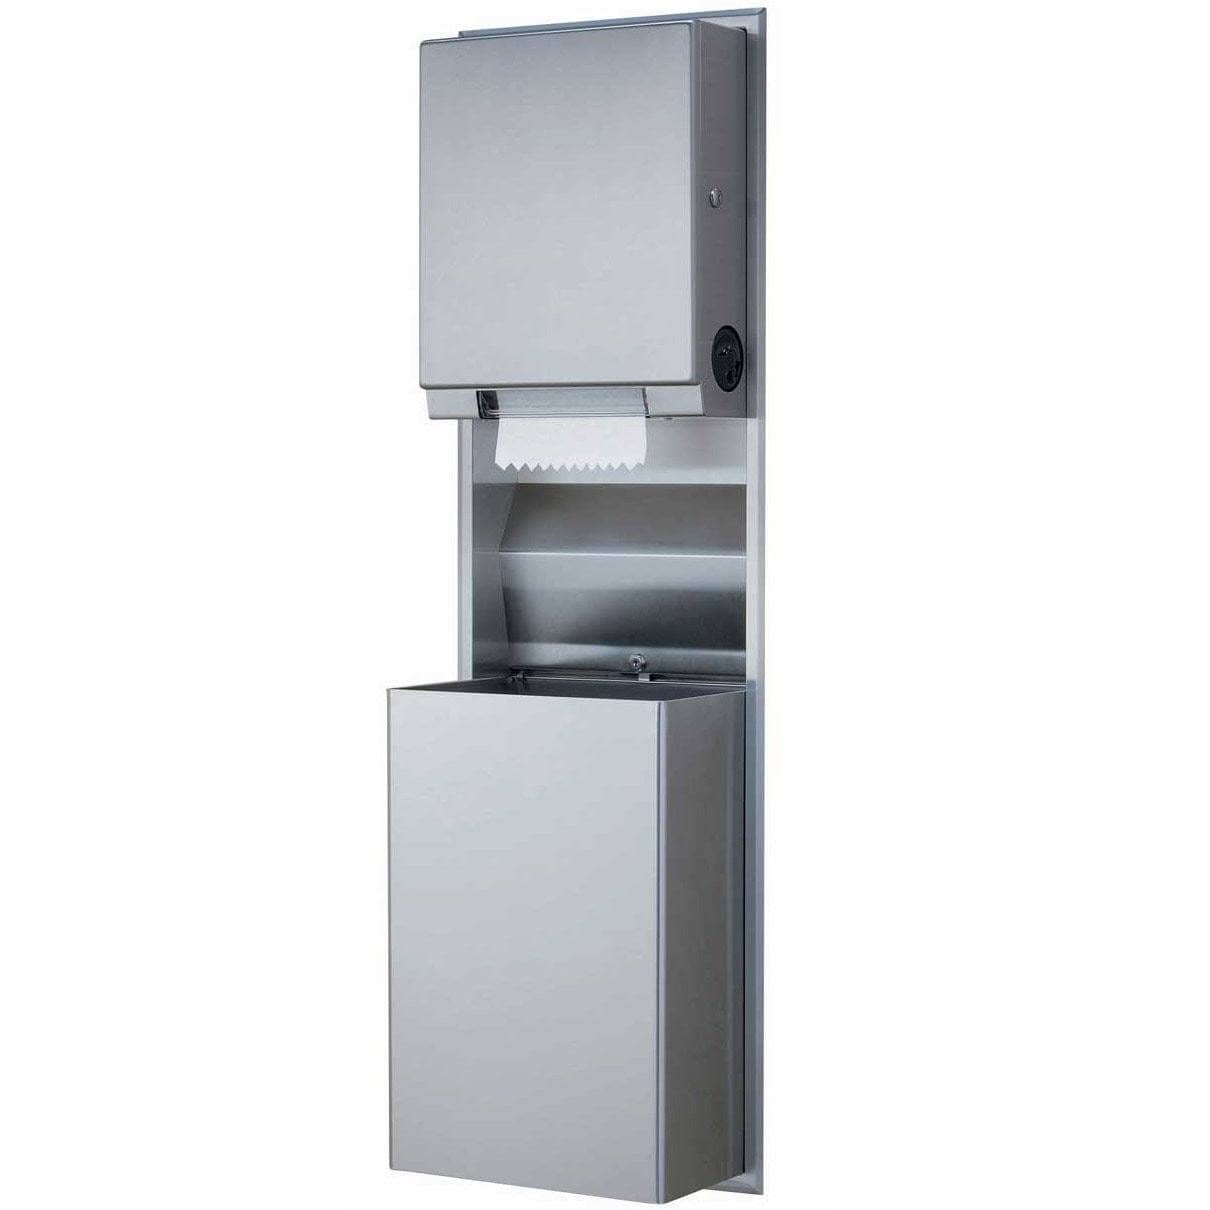 Bobrick B-3961 Combination Commercial Paper Towel Dispenser/Waste Receptacle, Recessed-Mounted, Stainless Steel - TotalRestroom.com